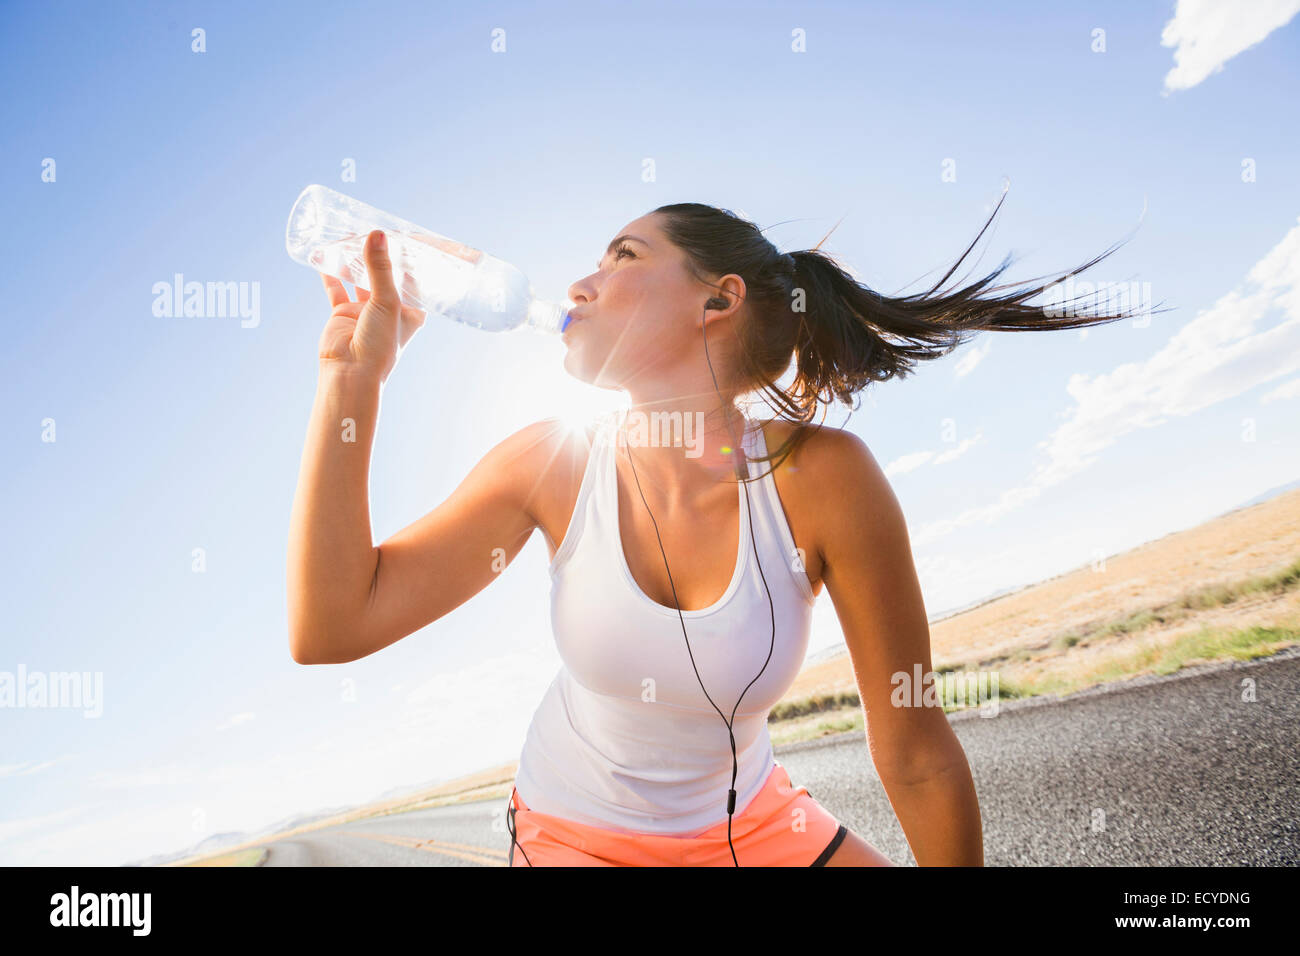 Caucasian runner drinking water bottle on remote road Stock Photo